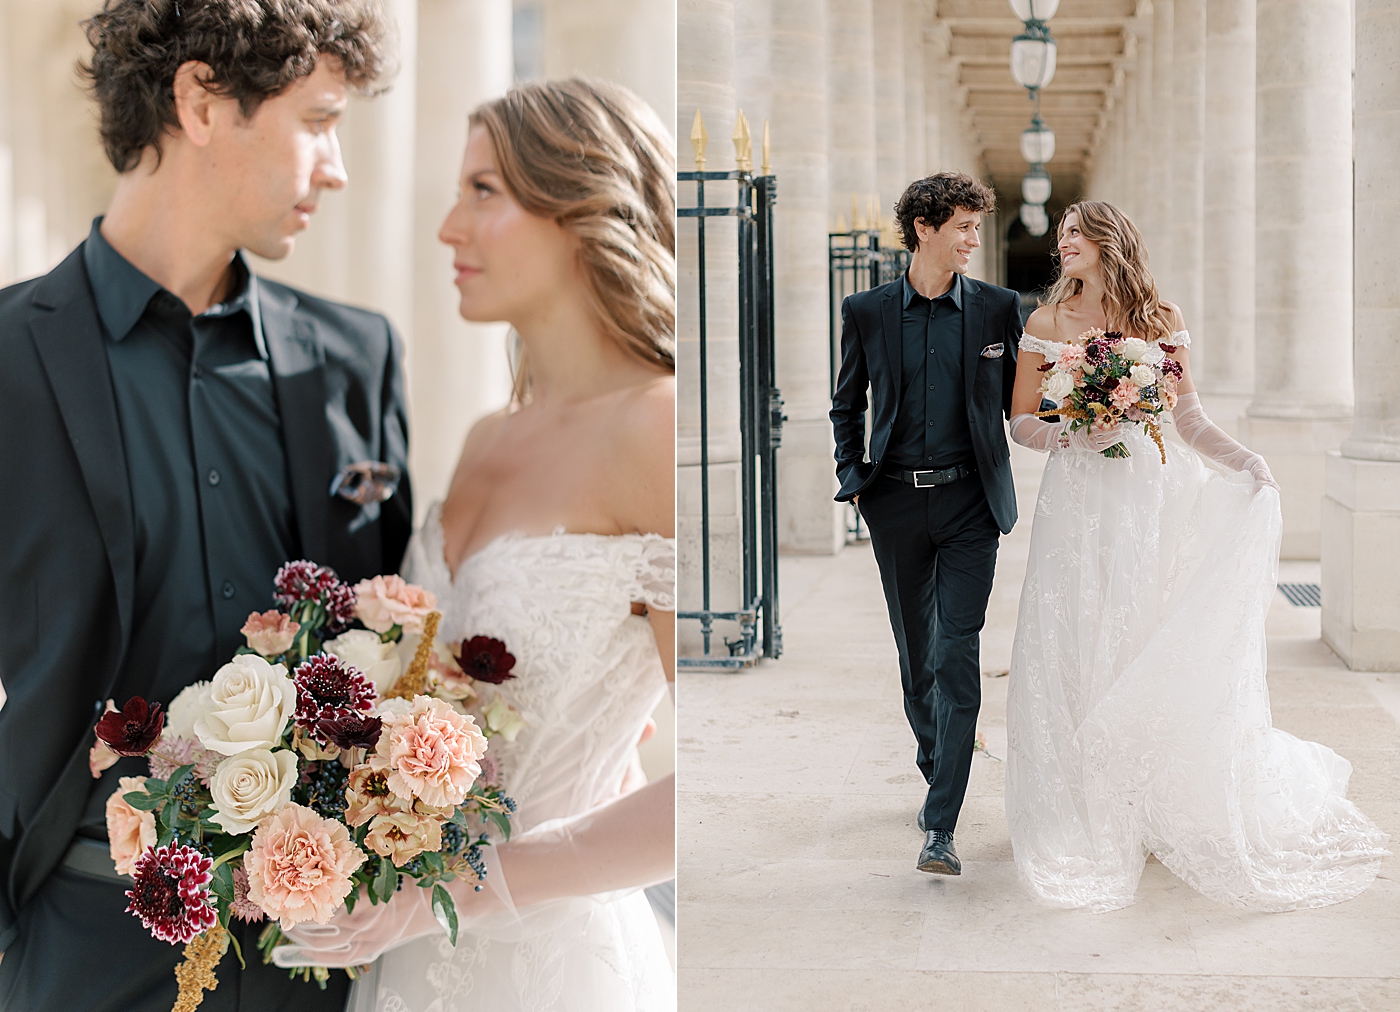 Dual image of a bride and groom looking at each other in an outdoor, sunlit, concrete corridor| Image by Hope Helmuth Photography